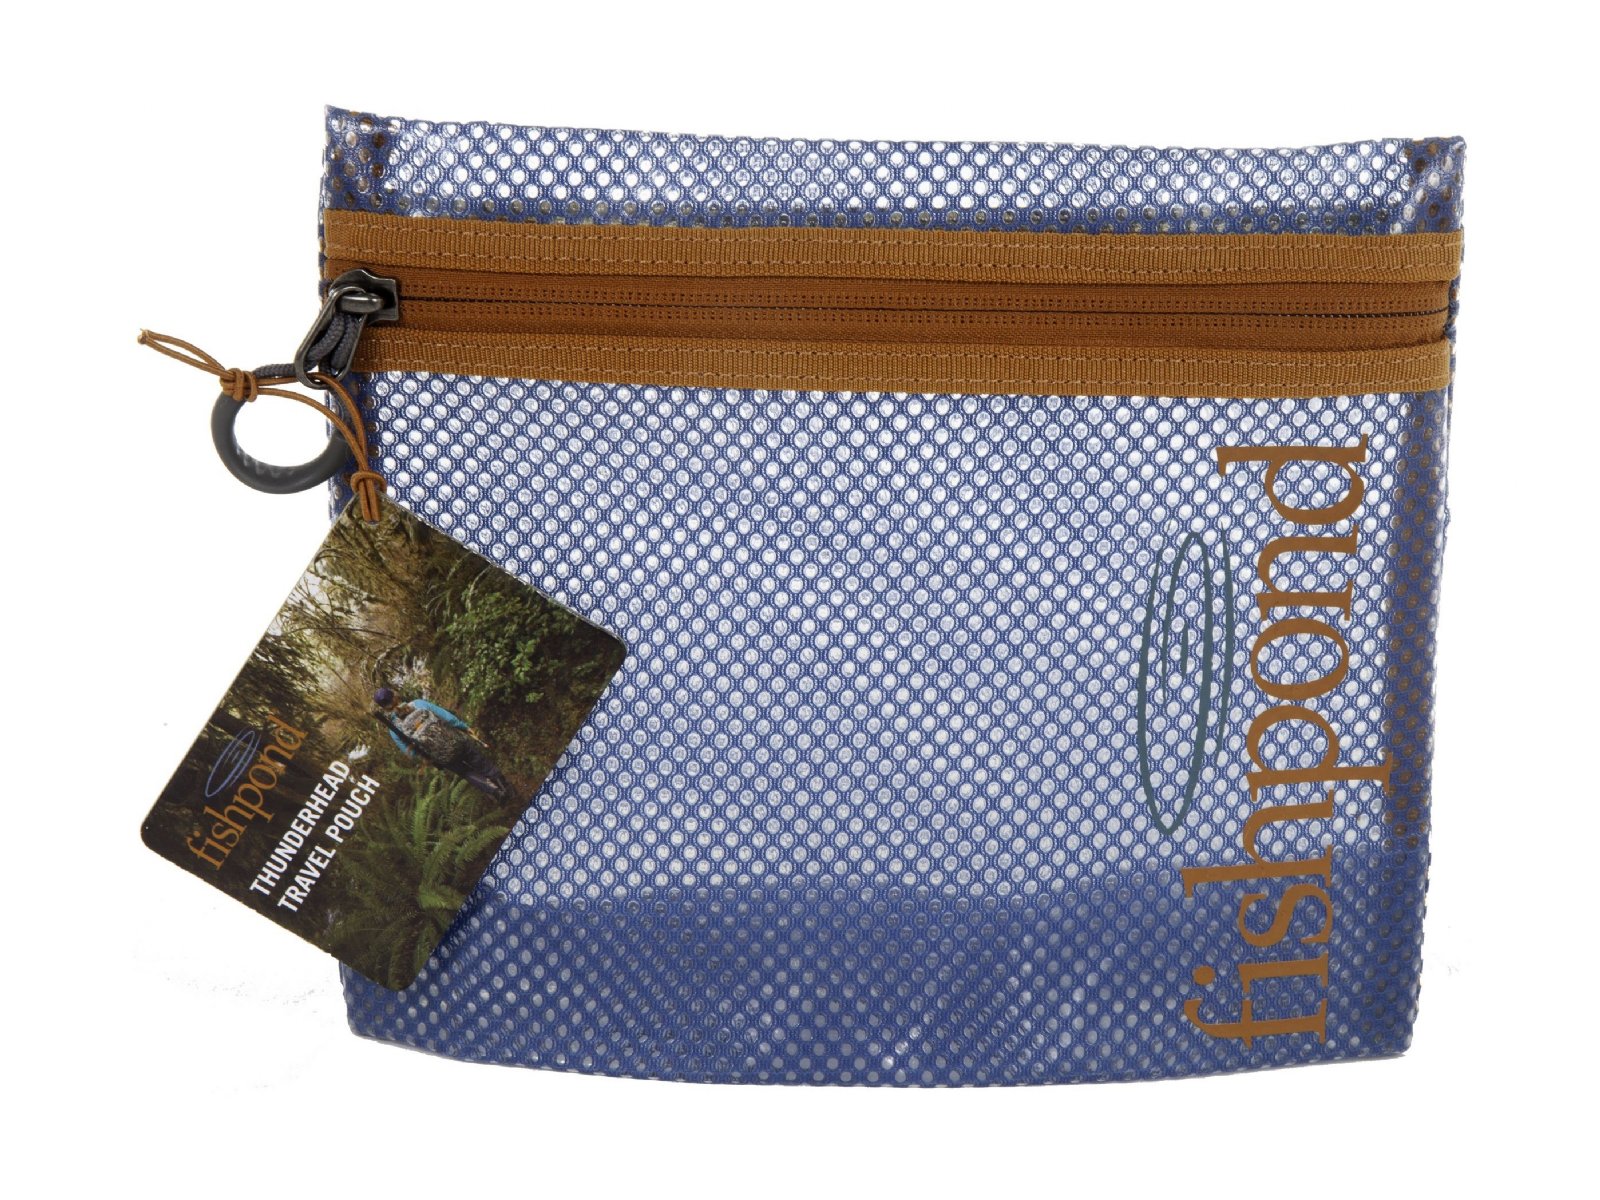 fishpond bags 